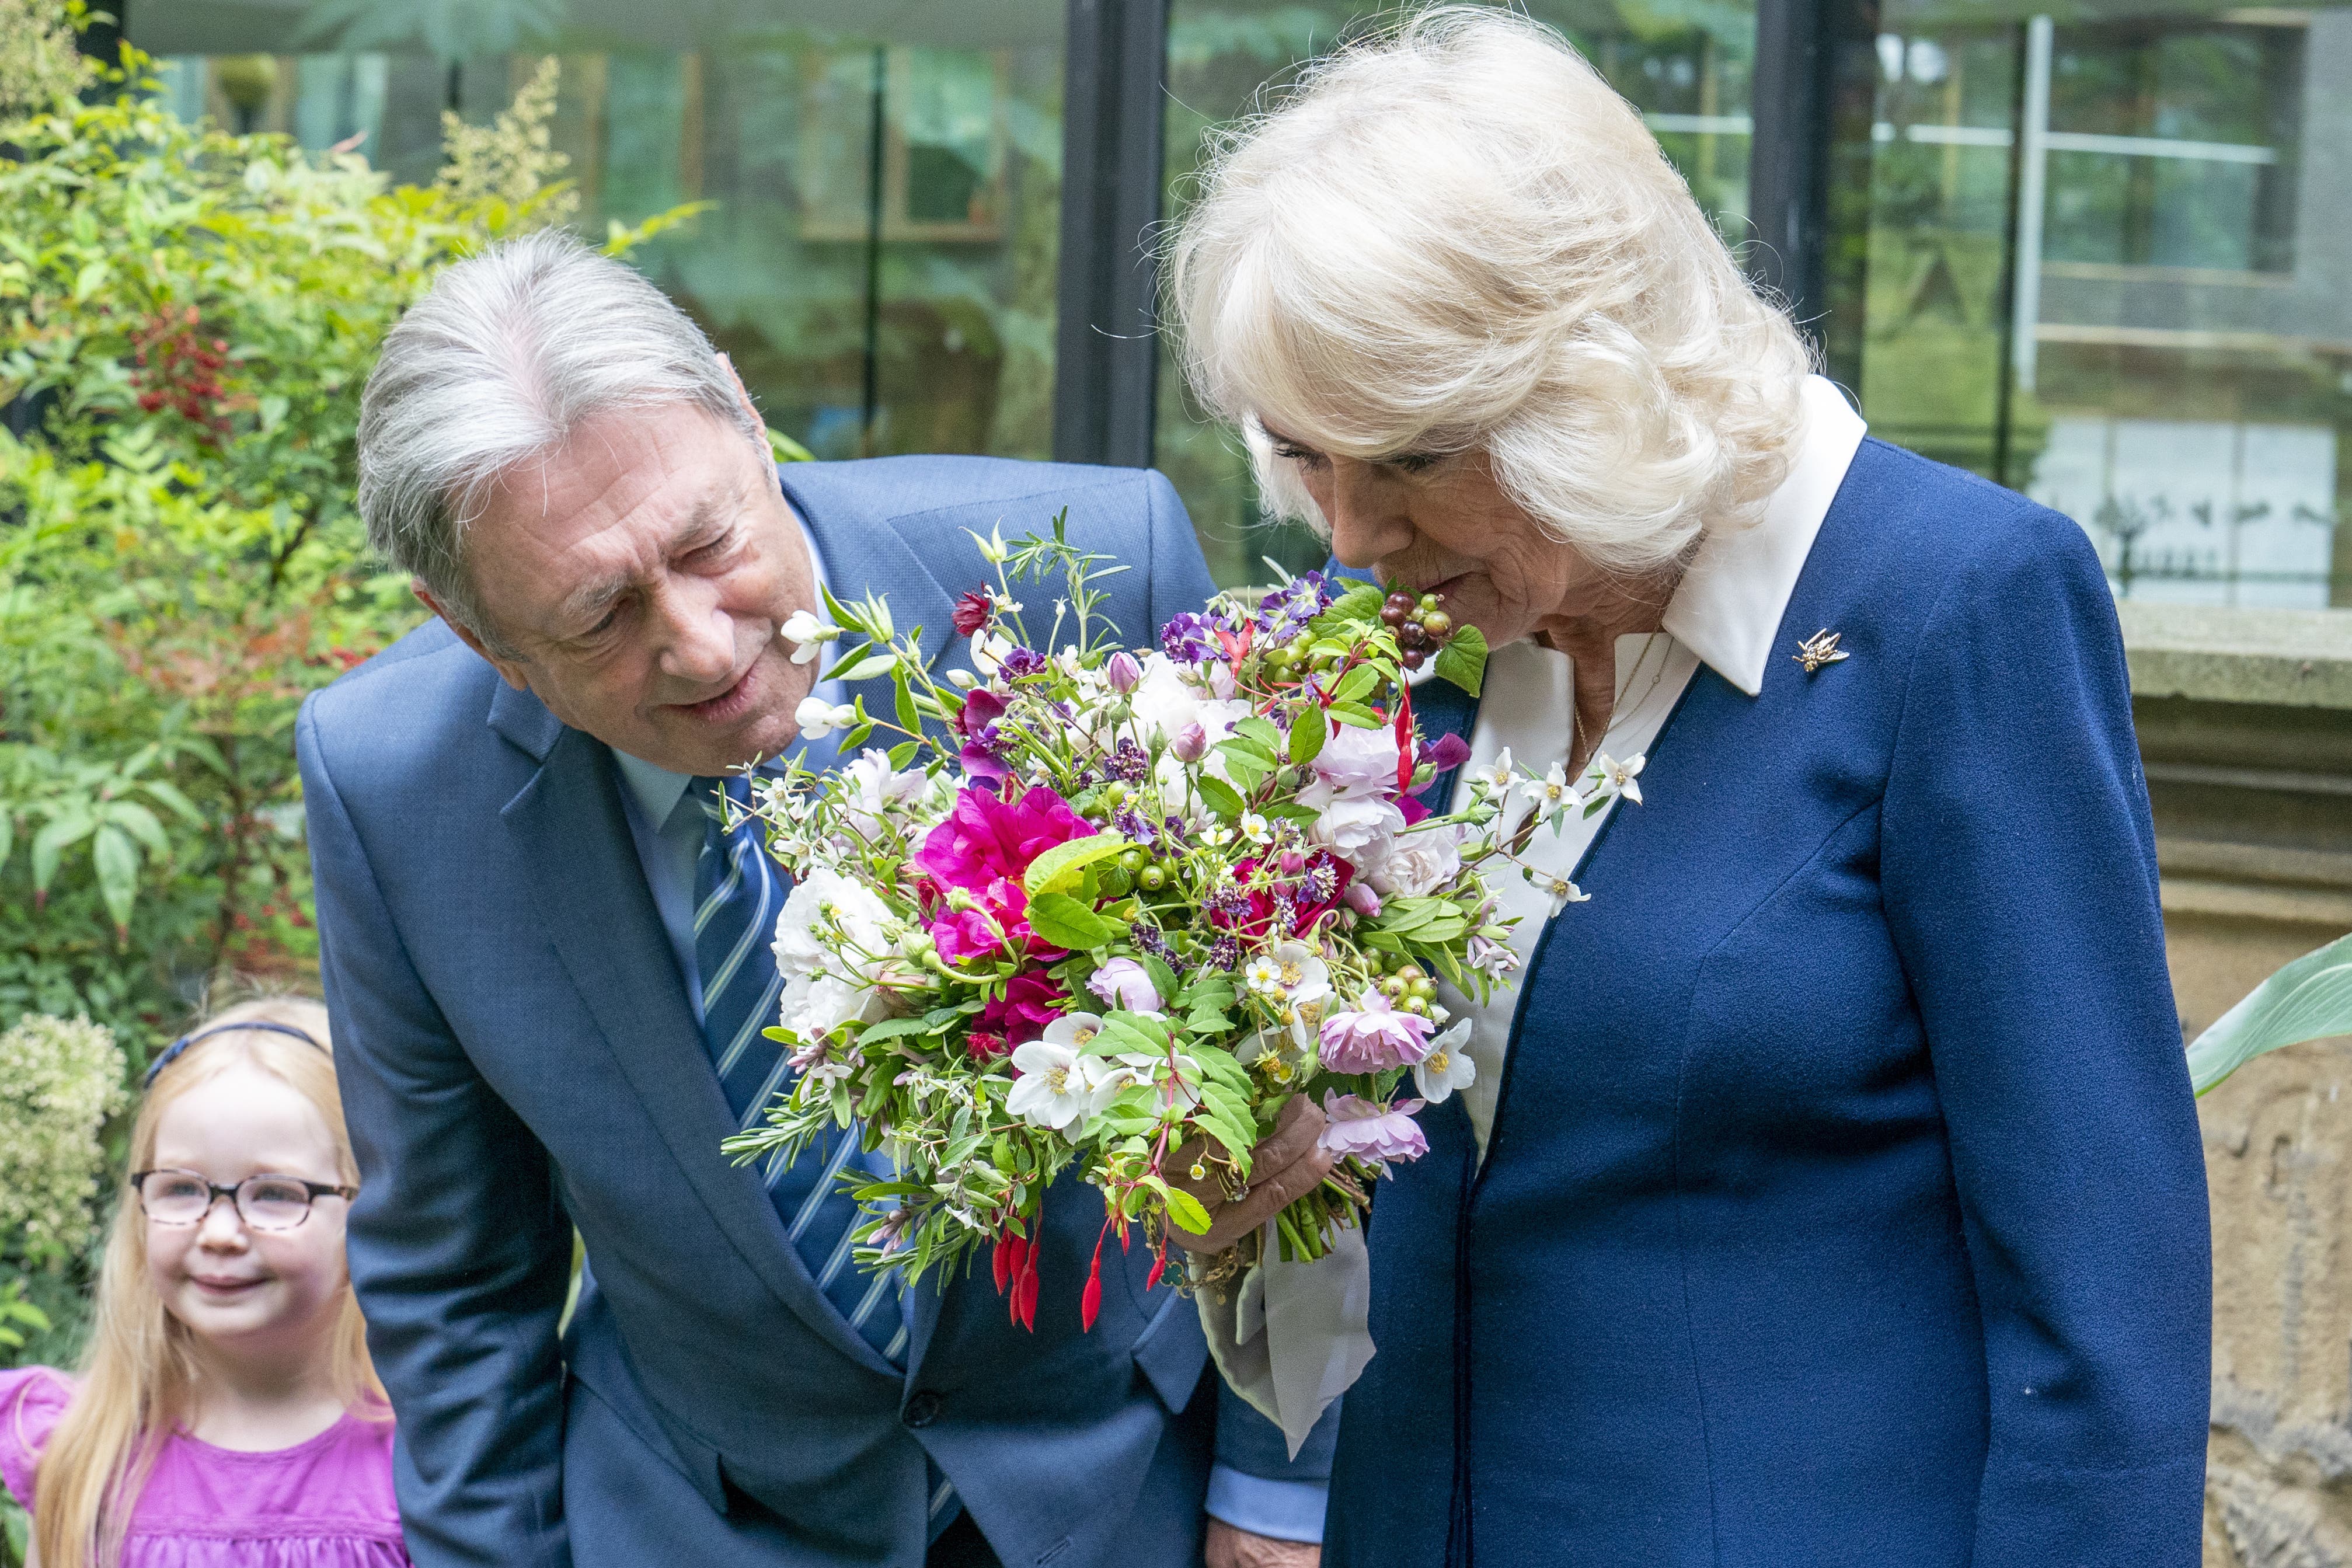 Queen Camilla is greeted by Alan Titchmarsh during a visit to the Gardening Bohemia exhibition at the Garden Museum, in Lambeth, south London (Arthur Edwards/The Sun/PA)